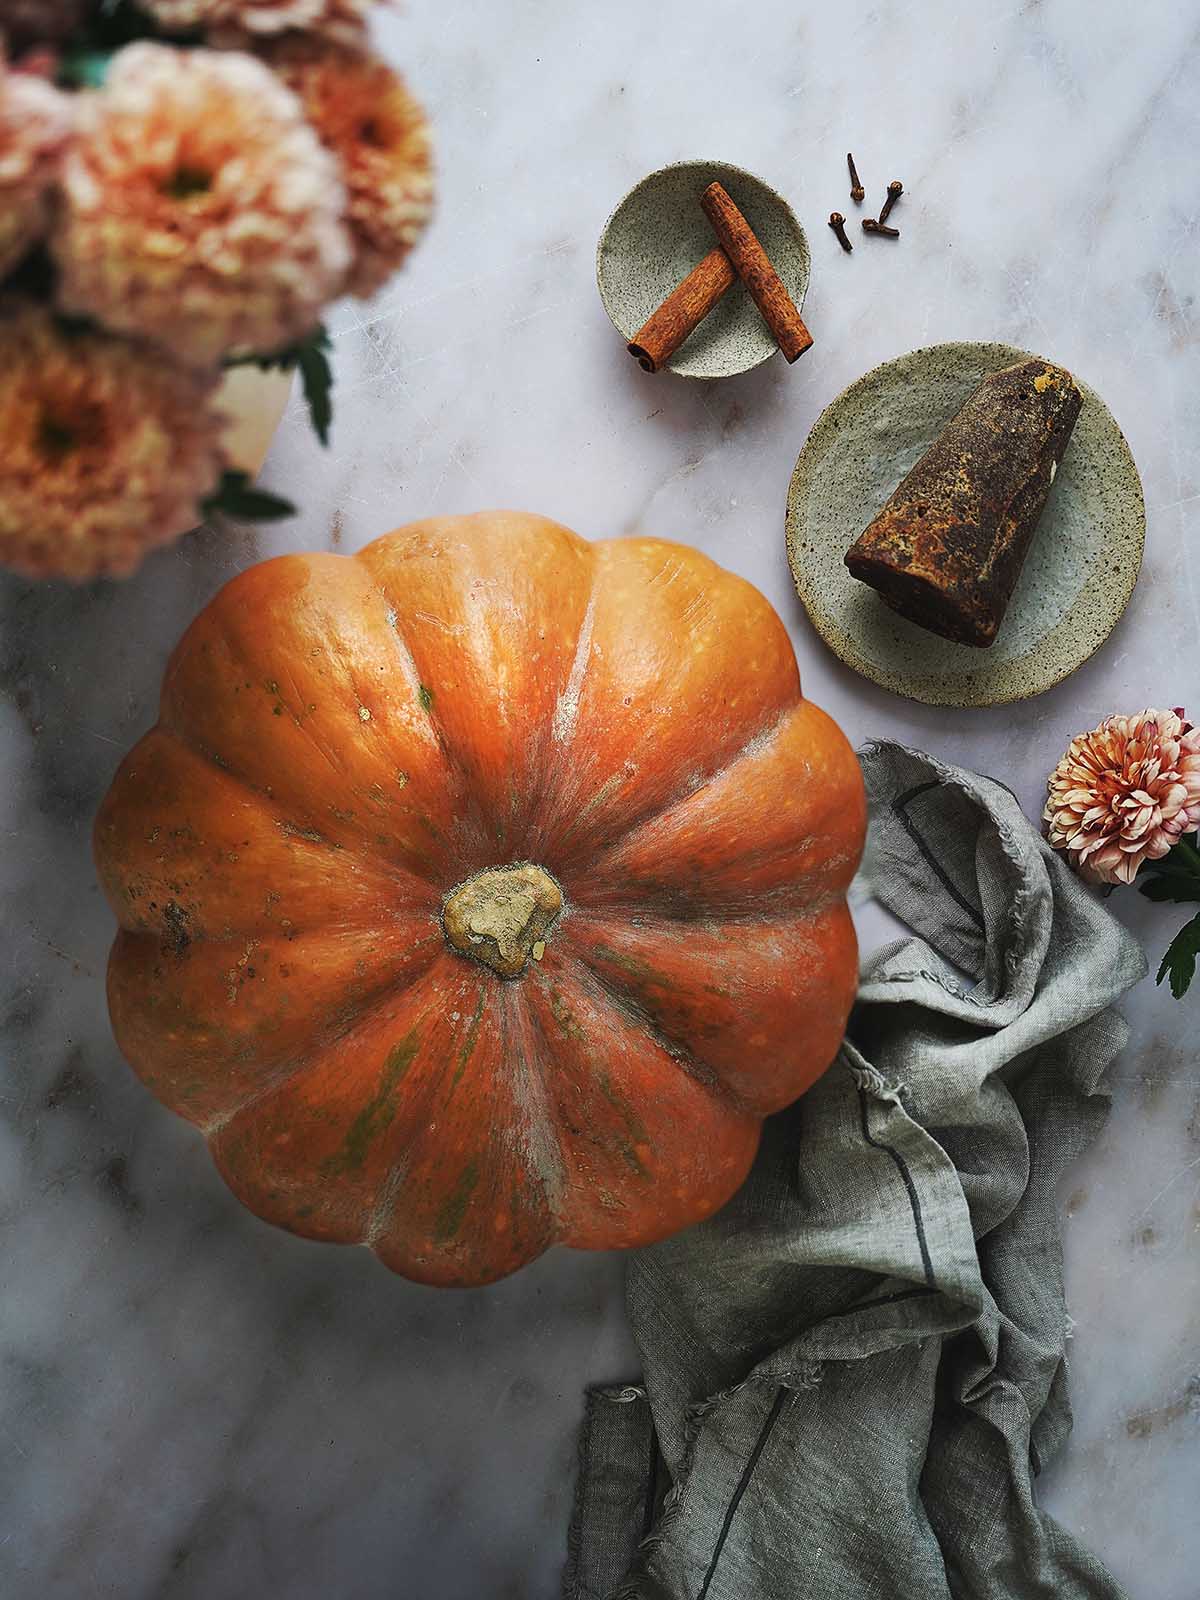 A large orange pumpkin, a piloncillo, two cinnamon sticks and 4 cloves on a white background.